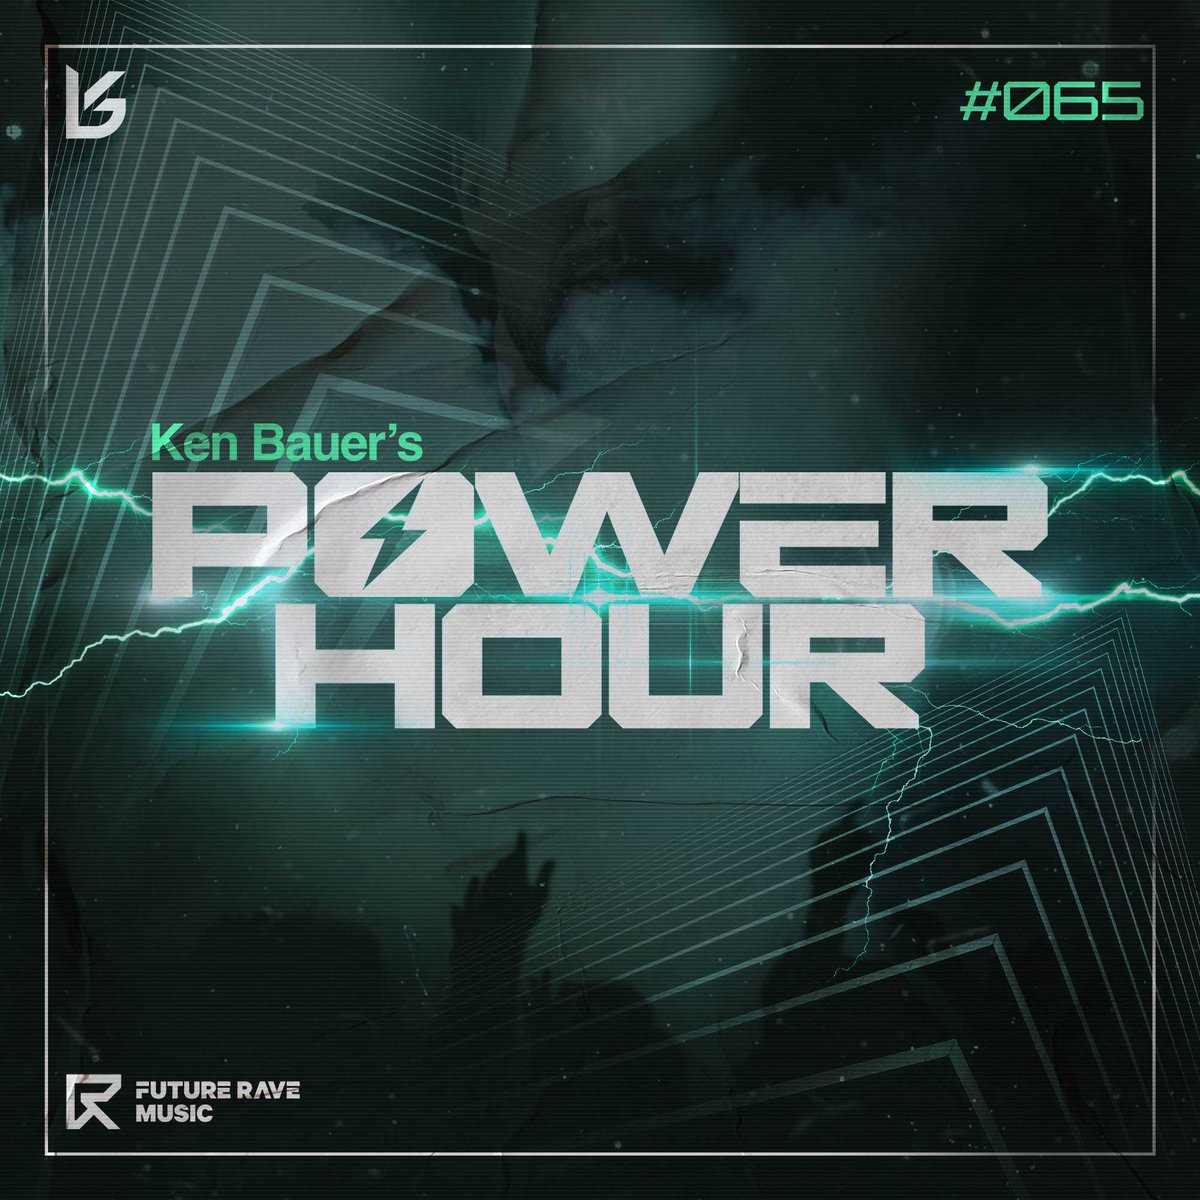 #nowplaying @kenbauersweden PowerHour on https://t.co/JLKsbgOdmW with #newmusic by @alokoficial , @oomloudmusic , @arminvanbuuren,  Volaris and many more https://t.co/nSoea1XBen